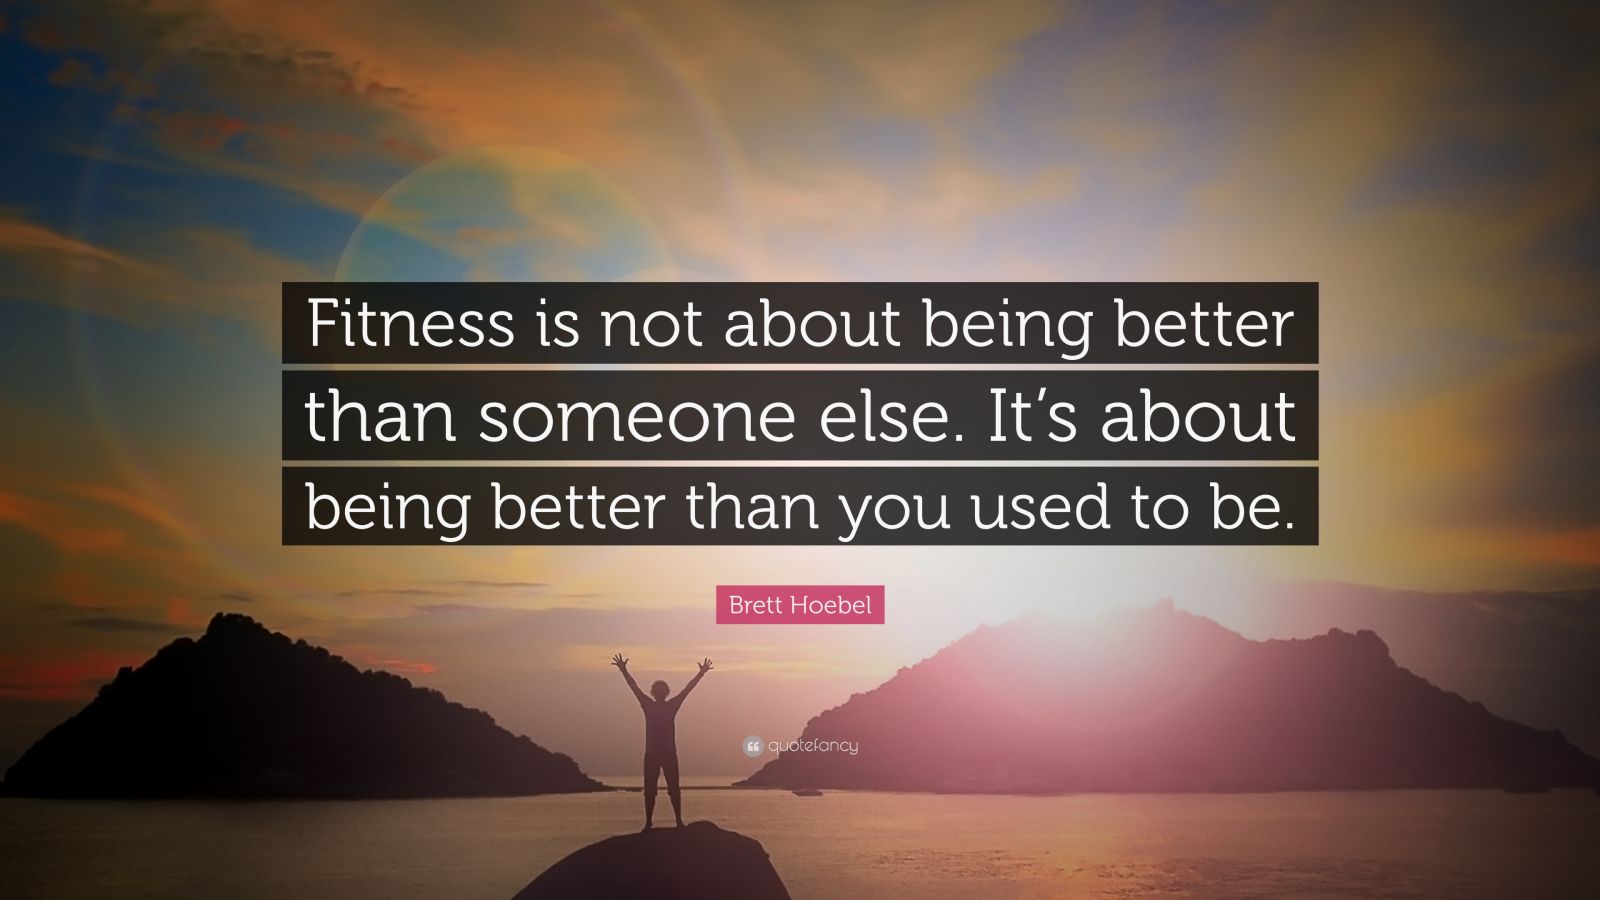 4675747 Brett Hoebel Quote Fitness is not about being better than someone